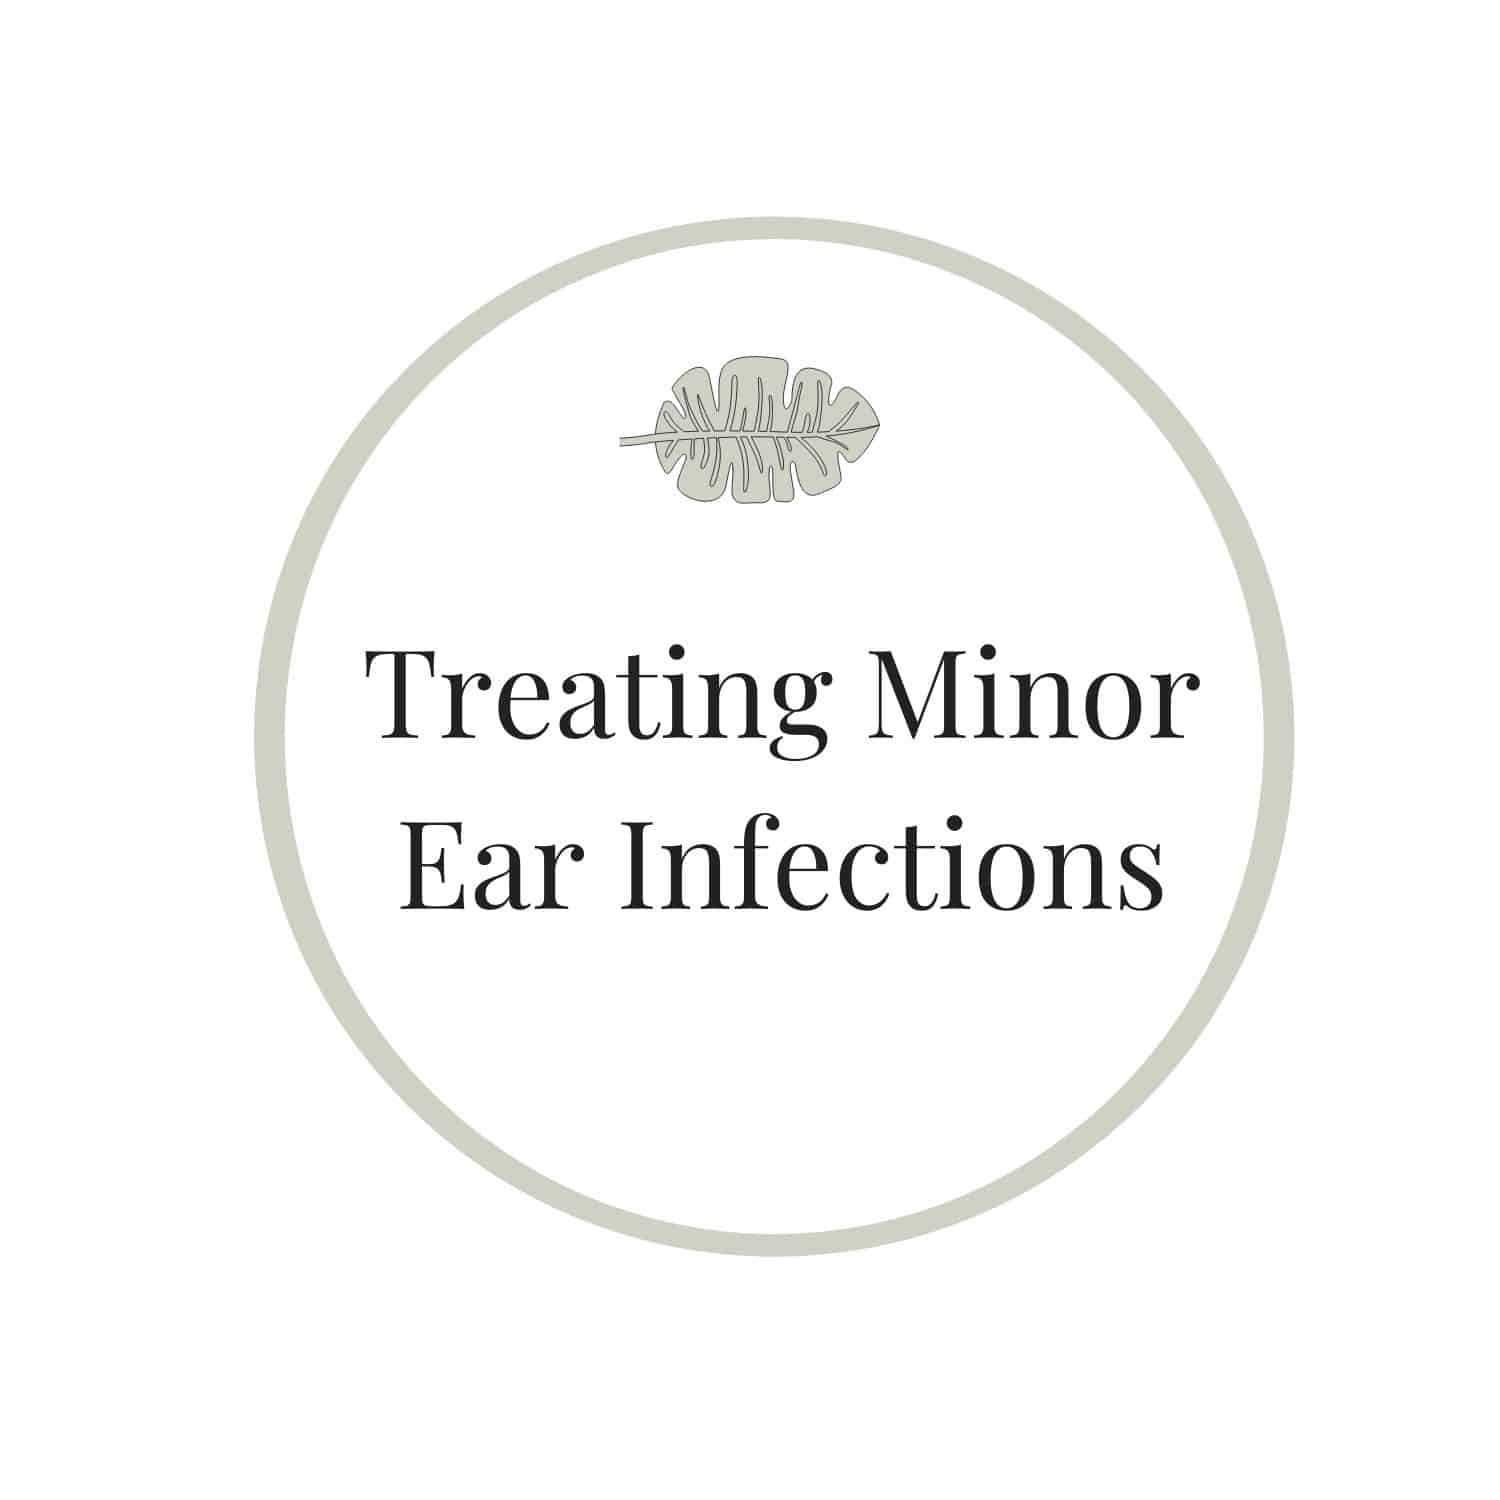 Treating Minor Ear Infections